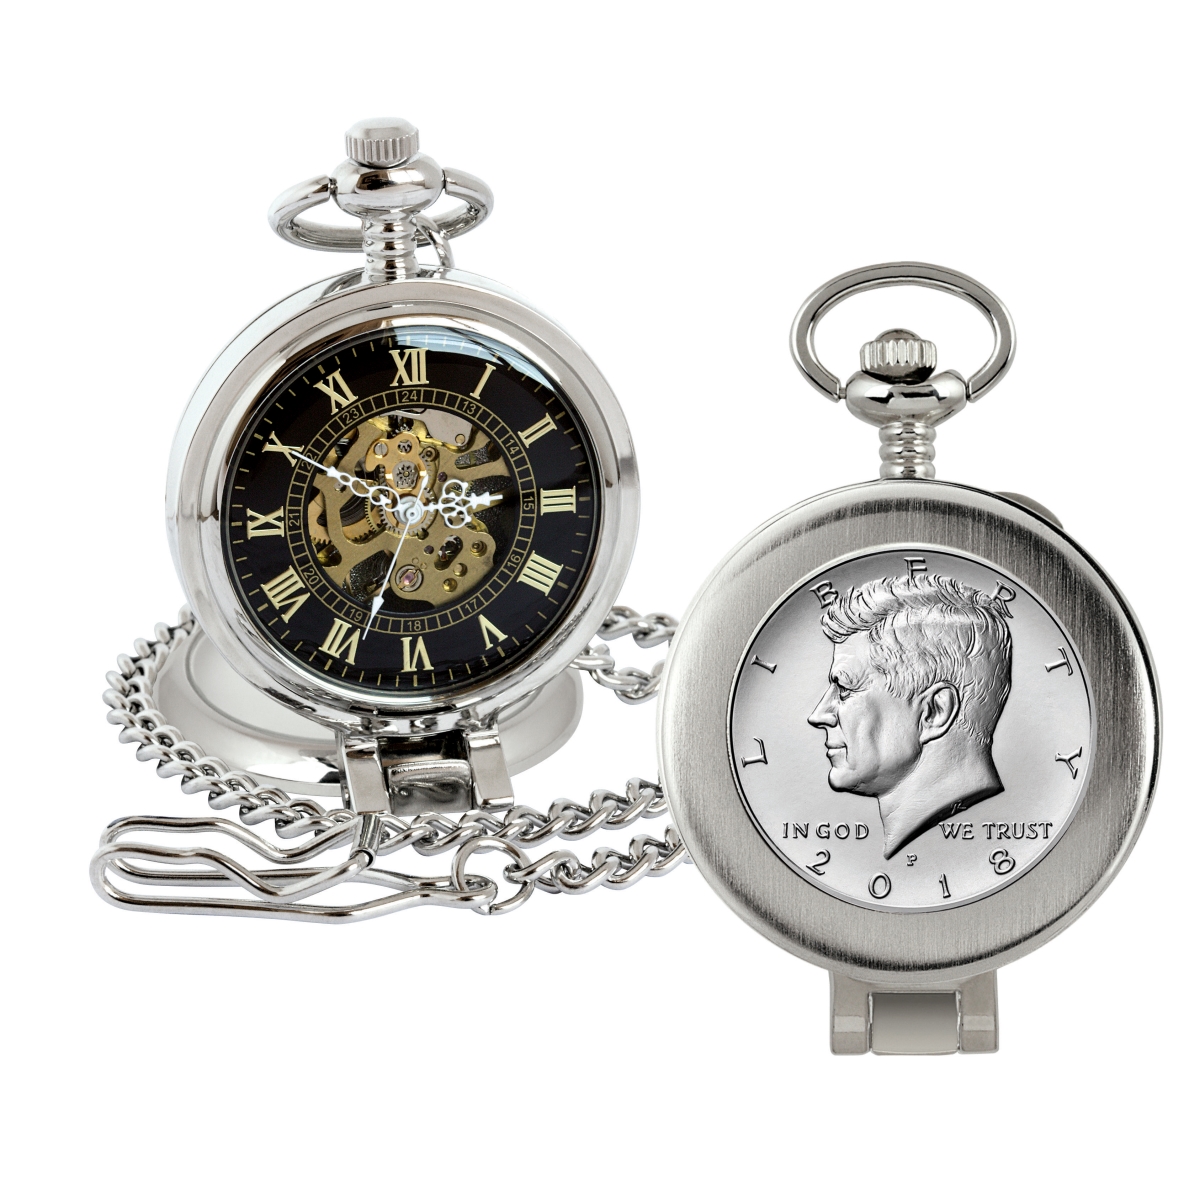 Picture of American Coin Treasures 16265 JFK Half Dollar Coin Pocket Watch with Skeleton Movement, Black Dial with Gold Roman Numerals - Magnifying Glass